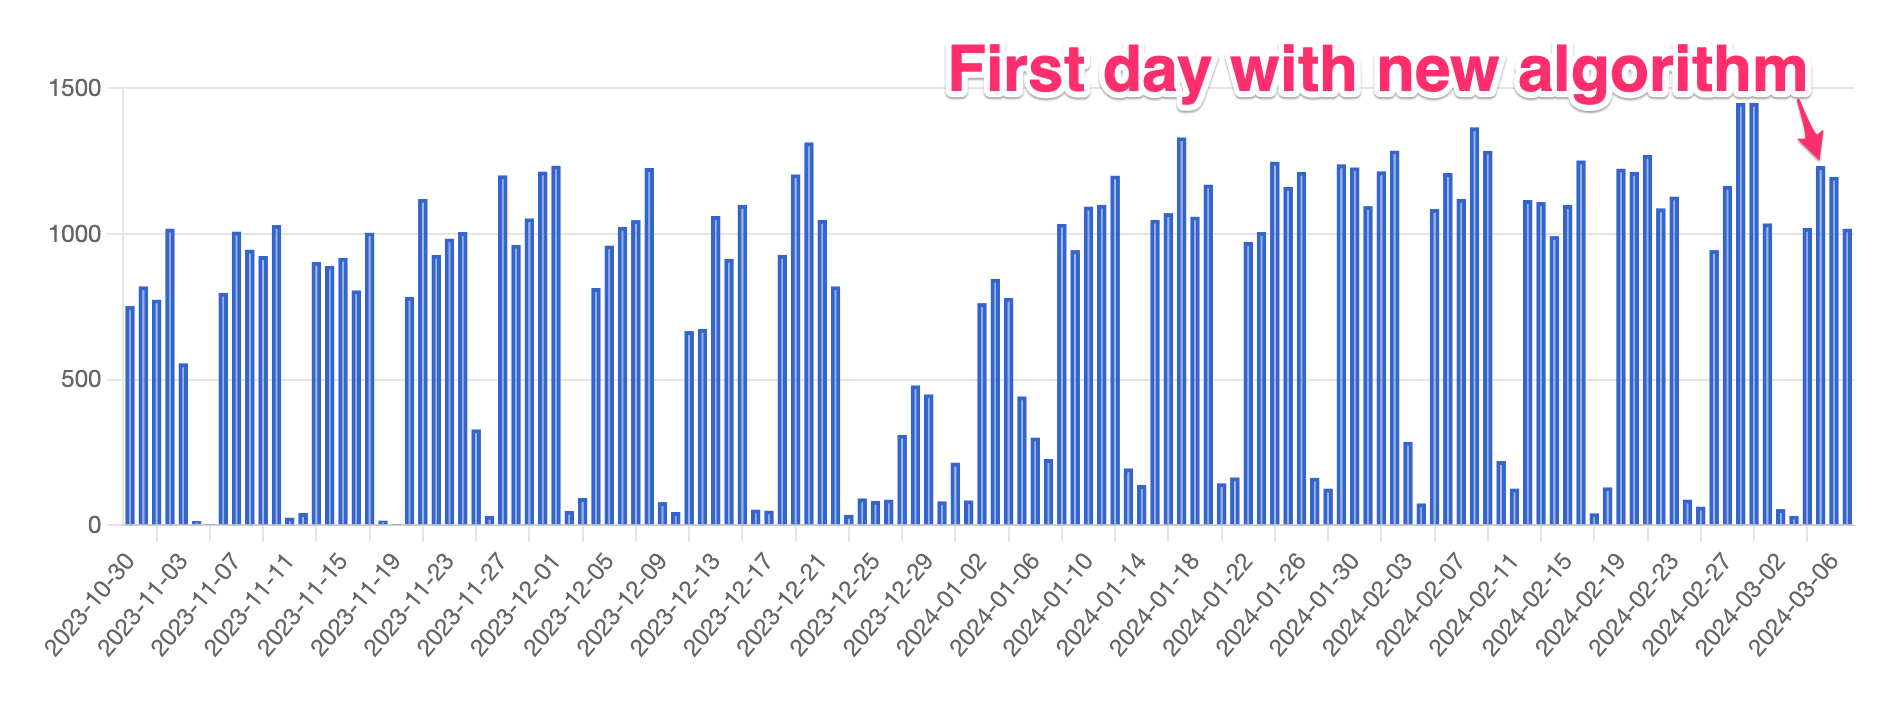 Bar chart with a y axis ranging from 0 to 1500 and an x axis ranging from 2023-10-30 to the present day. The bars are typically between 700 and 1200 high. Near the end, a pink arrow and text annotates one of the bars as “First day with new algorithm”.